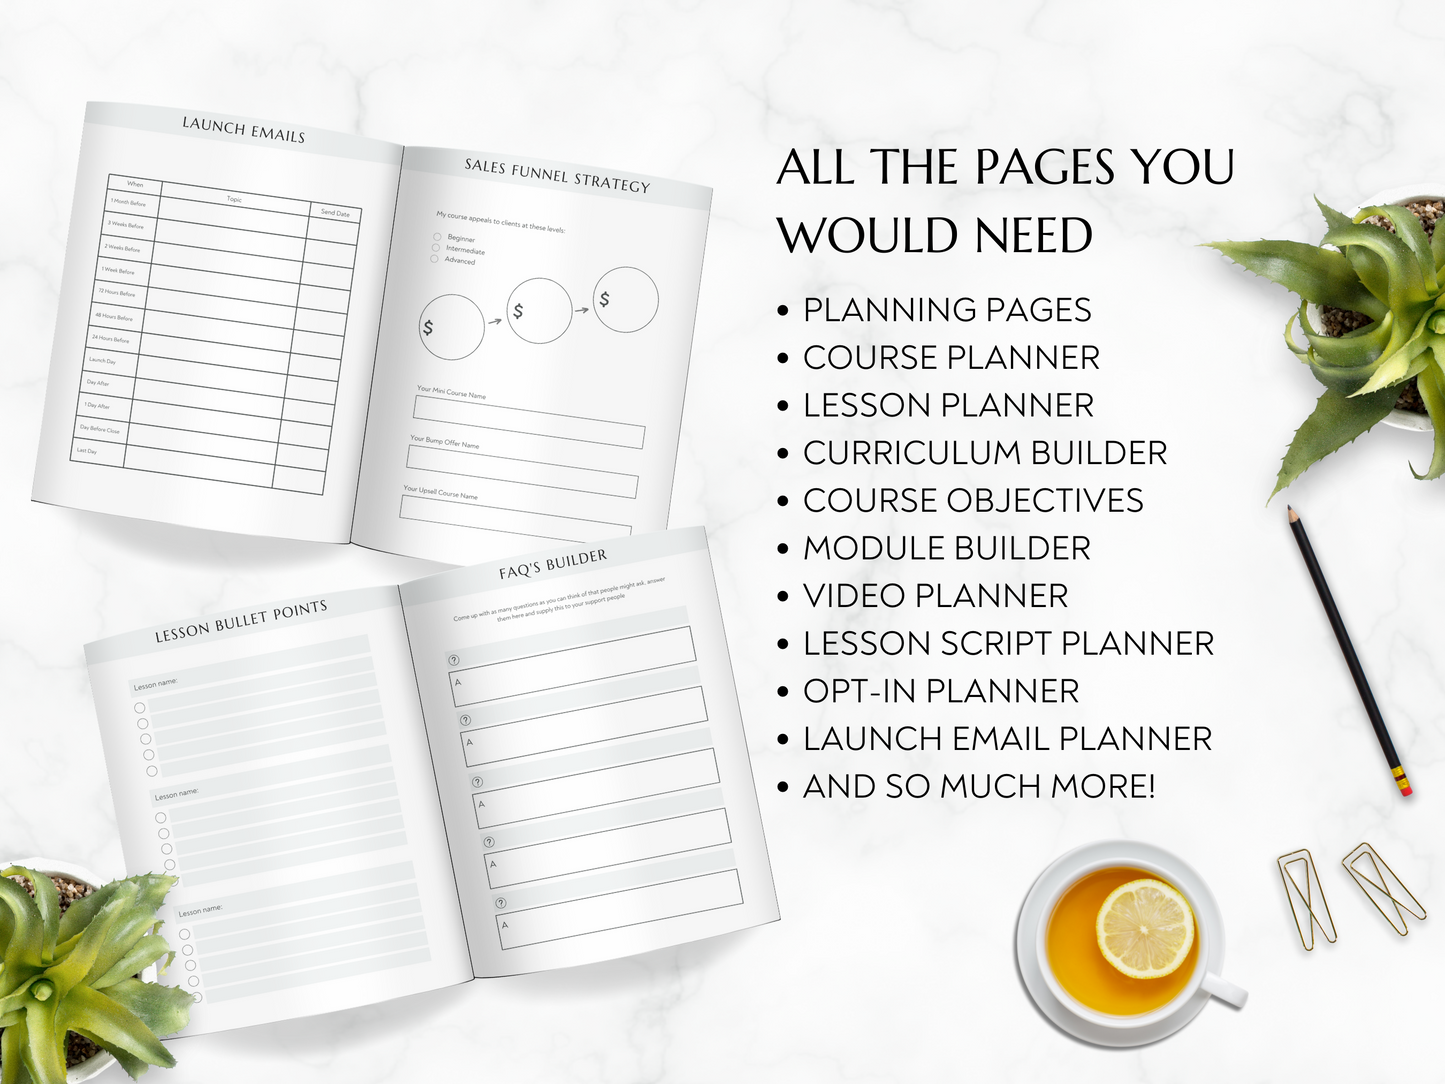 The Course Creation Planner